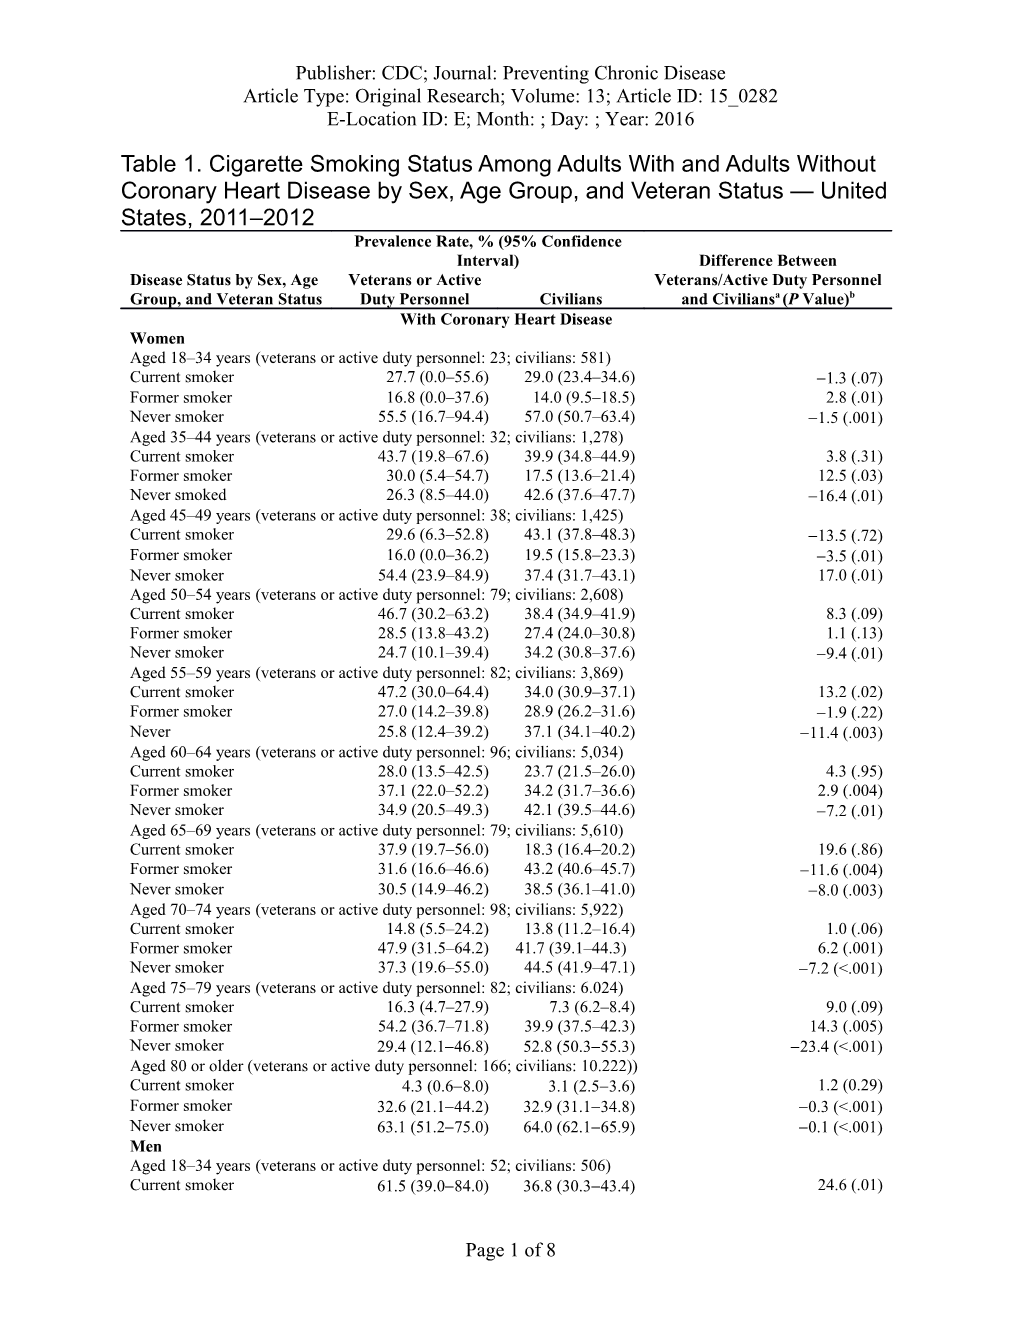 Cigarette Smoking, Reduction and Quit Attempts: Prevalence Among Veterans with Coronary